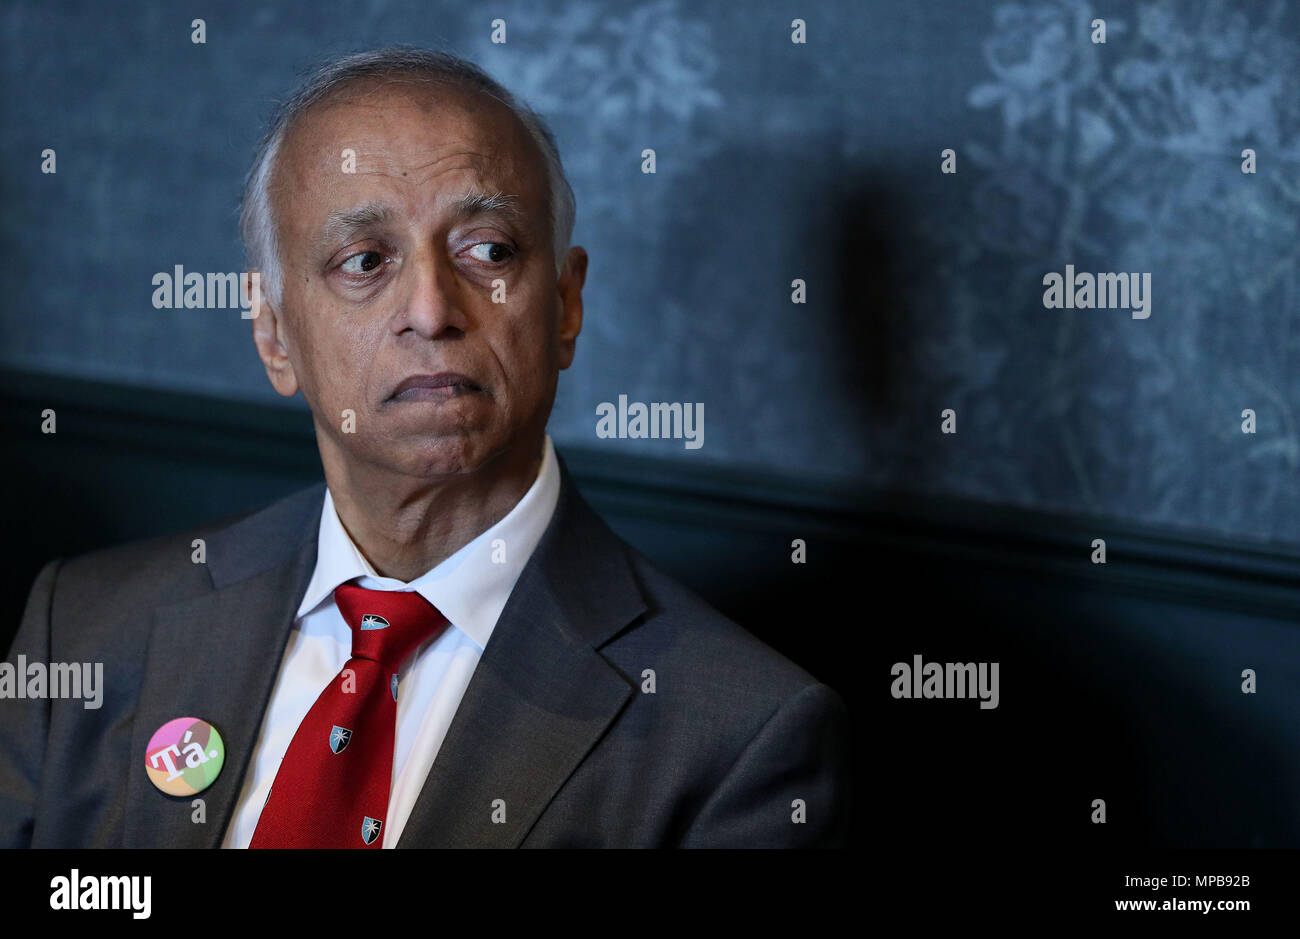 Professor Sir Sabaratnam Arulkumaran, who headed the inquiry into the death of Savita Halappanavar, speaking at a press event hosted by the Irish Family Planning Association (IFPA) at the Alex Hotel, Dublin, where he urged a Yes vote ahead of the referendum on the 8th Amendment of the Irish Constitution on May 25th. Stock Photo